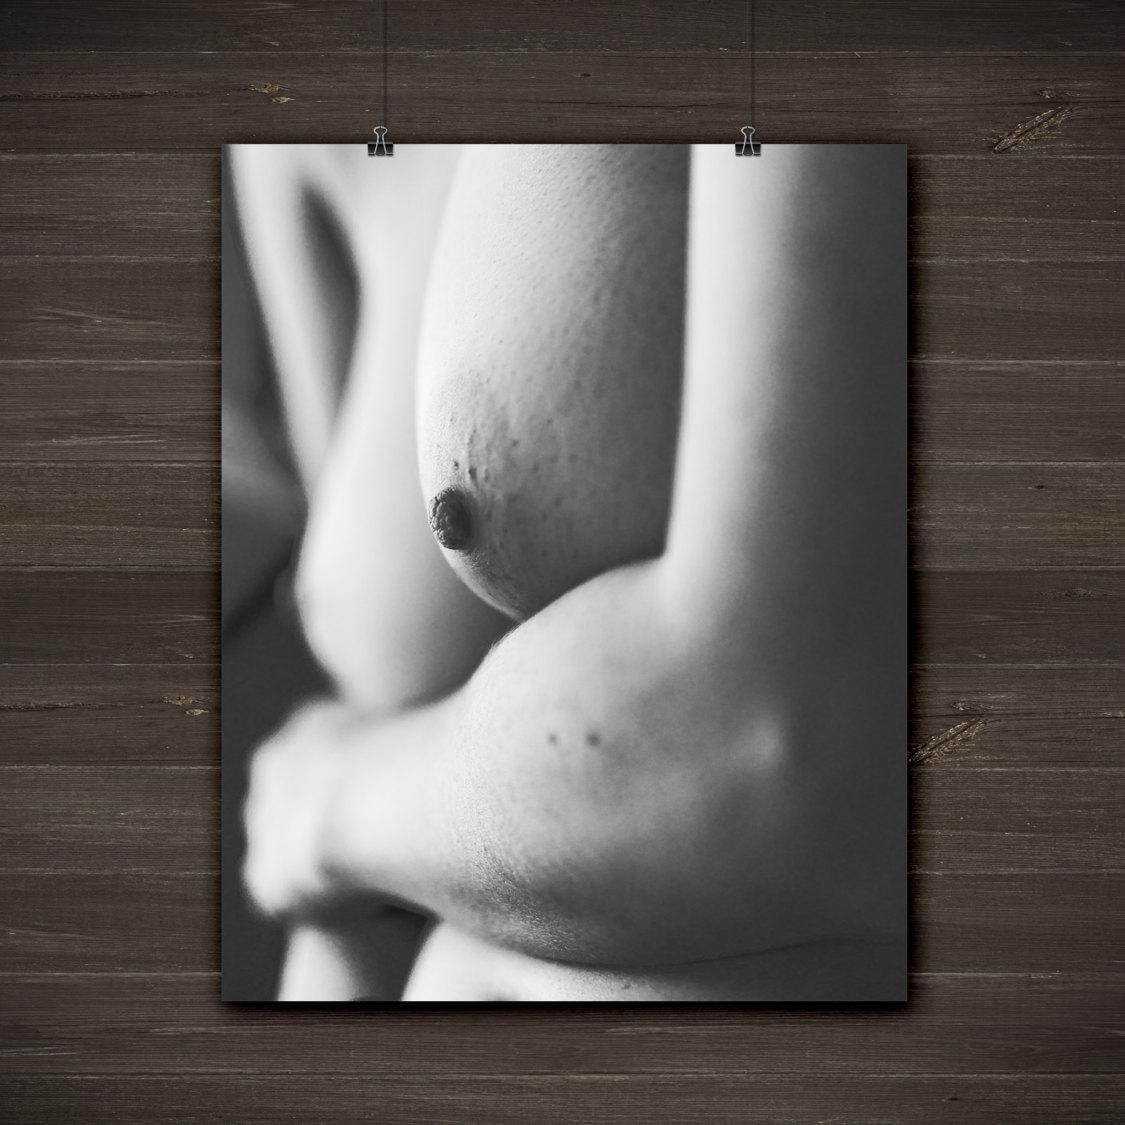 Erotic Photography Awkward Nude Canvas Art Sensual Female Intended For Sensual Wall Art (View 10 of 20)